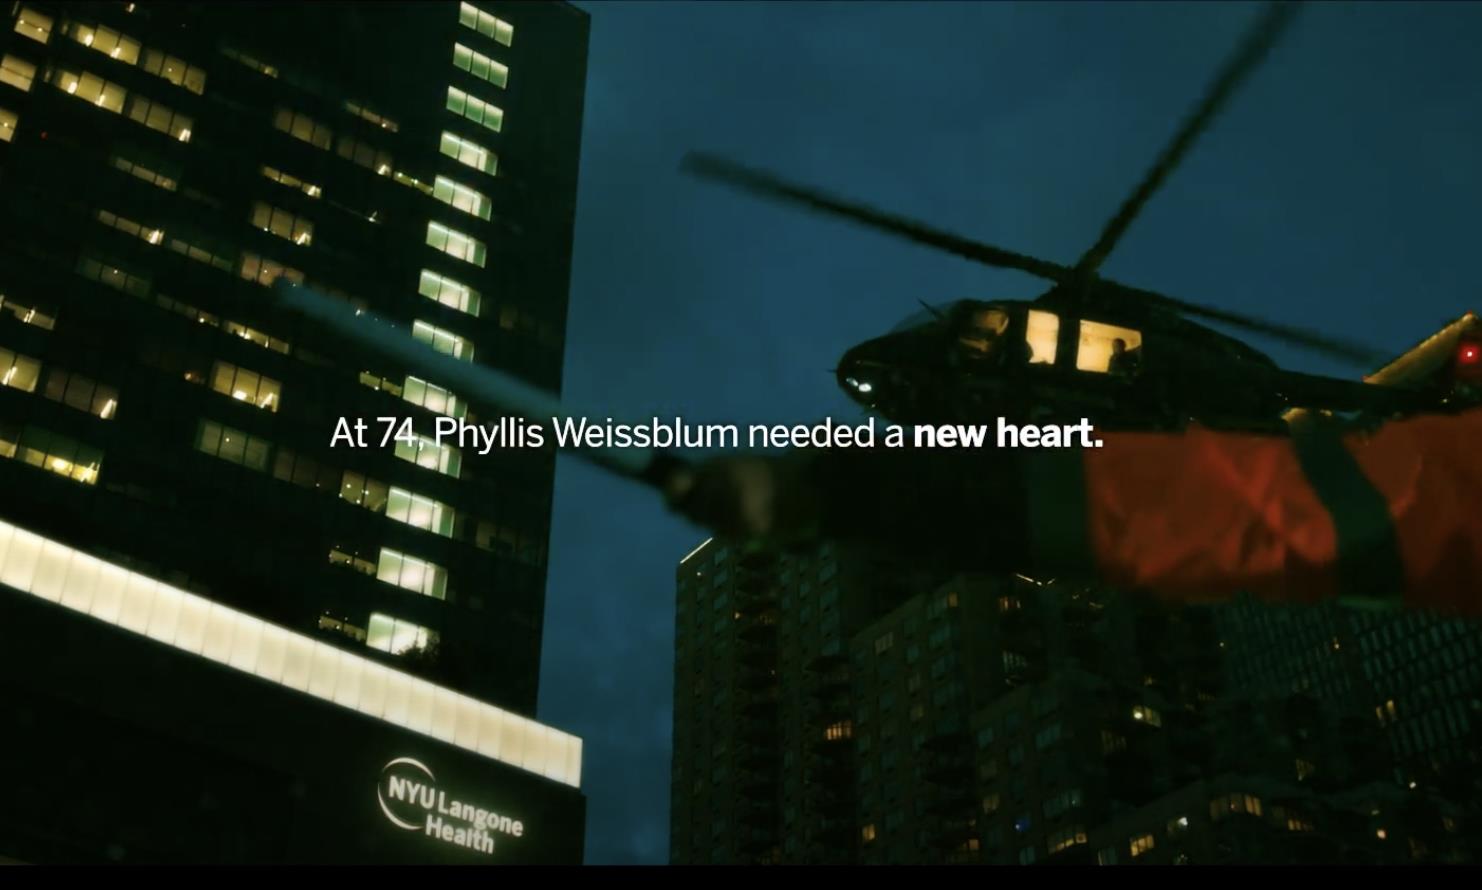 NYU Langone Health – Integrated Campaign - Hearts for Phyllis